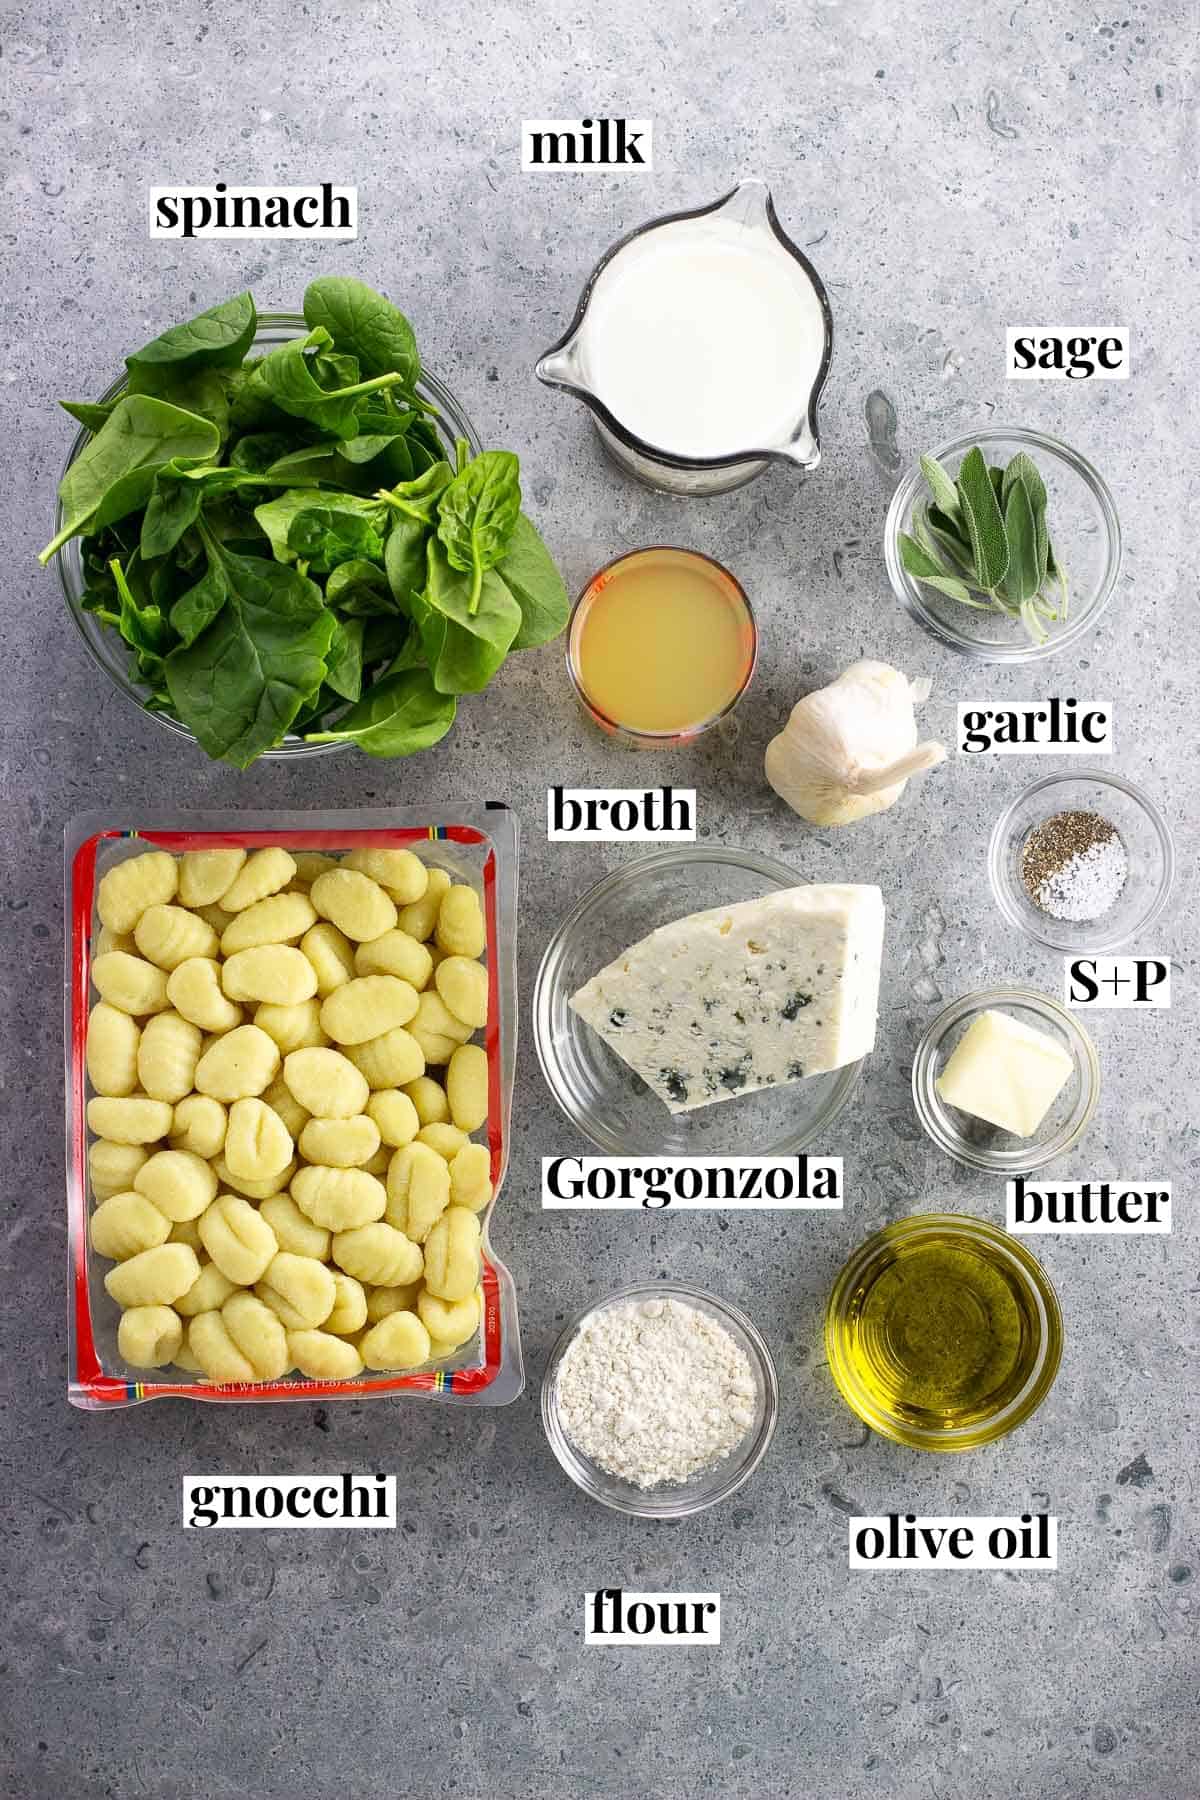 Recipe ingredients in separate containers labeled with text.